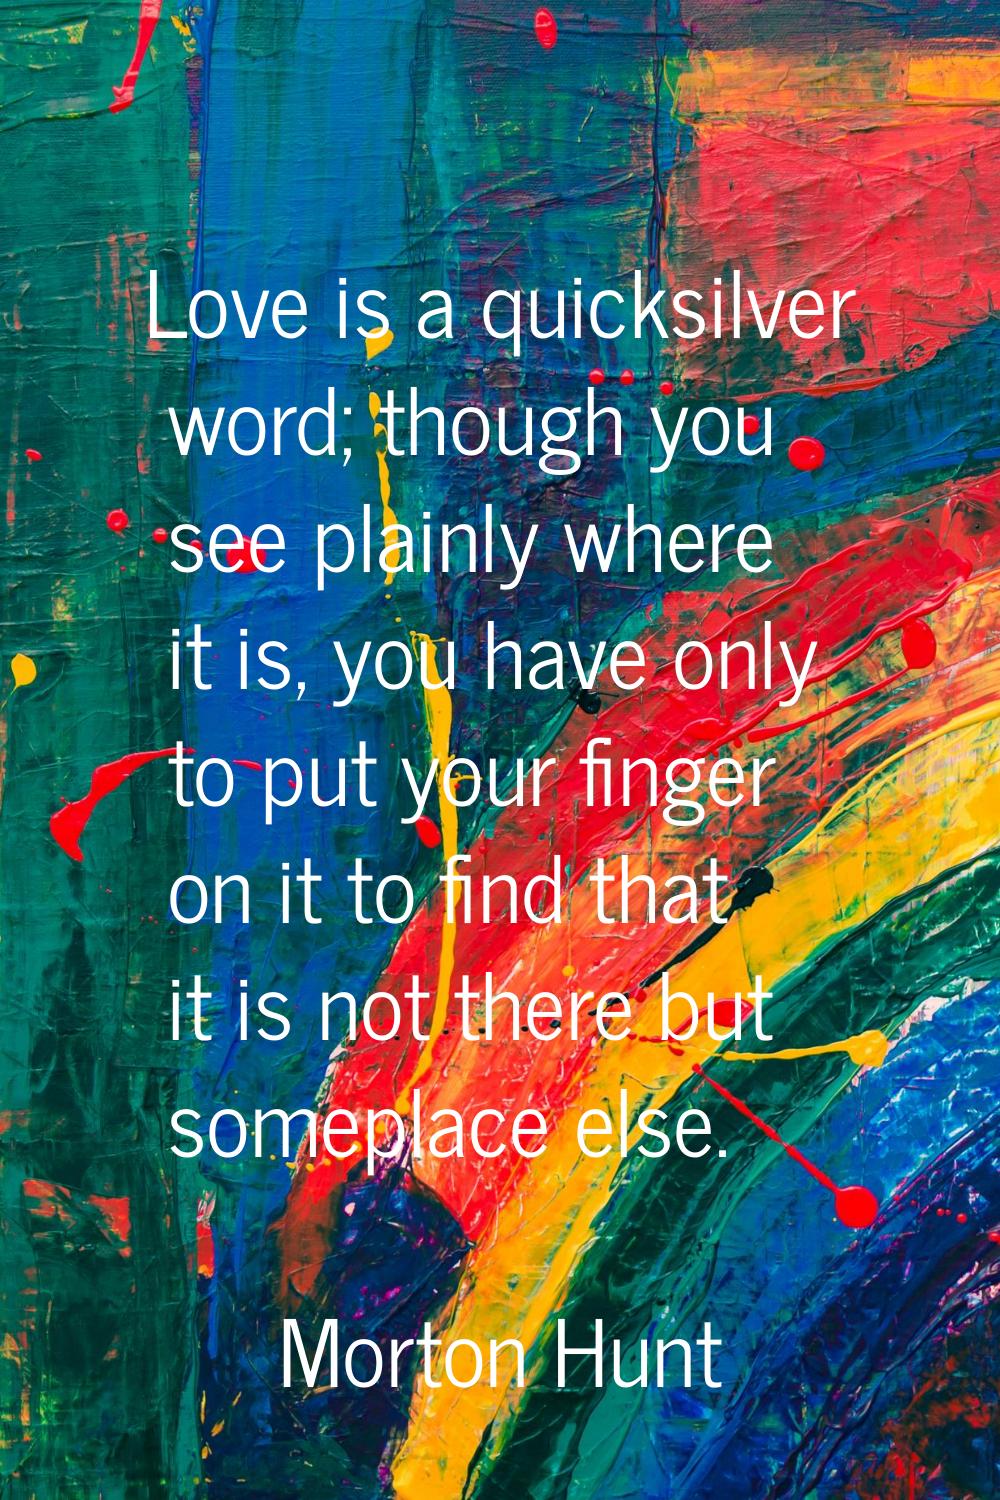 Love is a quicksilver word; though you see plainly where it is, you have only to put your finger on